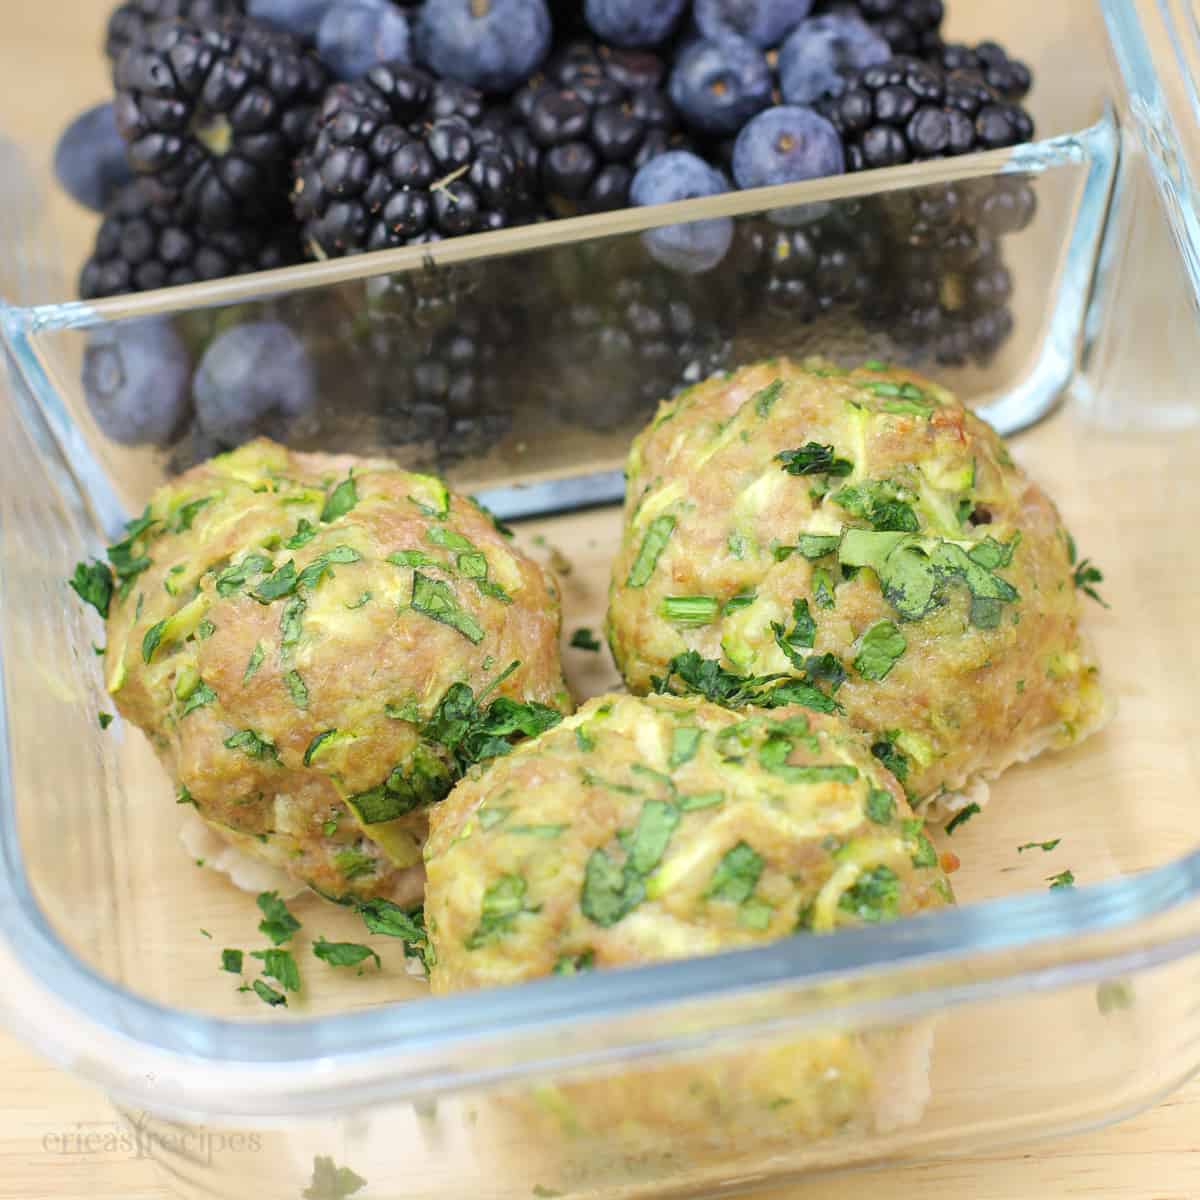 glass container with 3 cooked meatballs in 1 compartment, blackberries in the other compartment